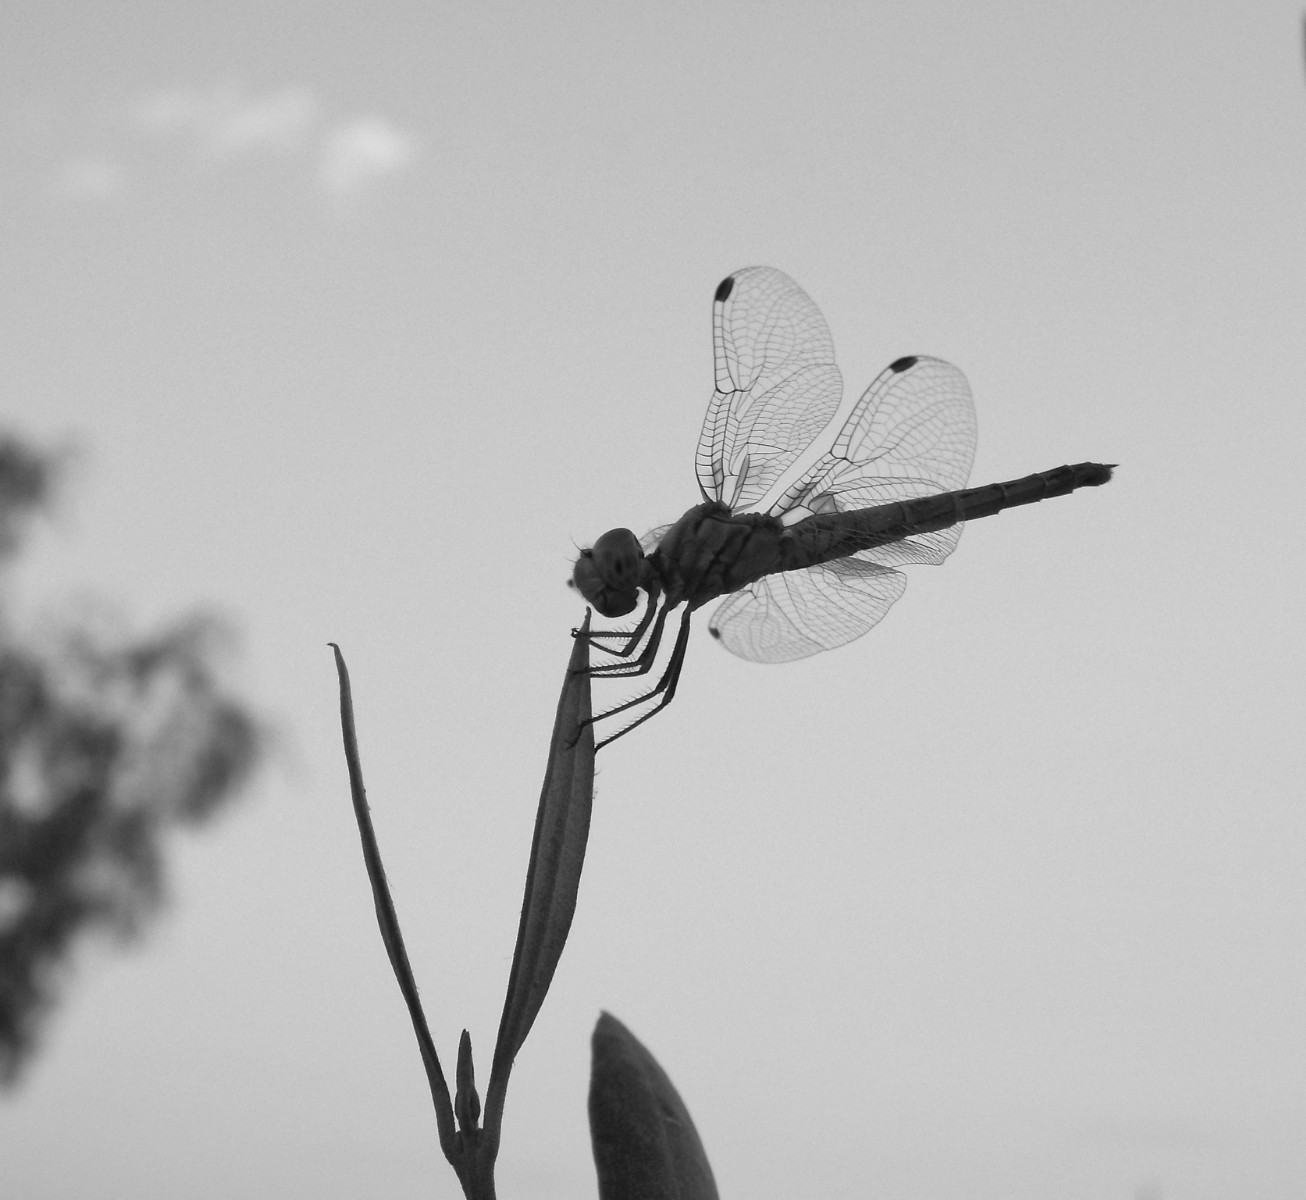 Stability, Dragon | Dragonfly | Black | Black and White | Wing | Winged | Insect | Nature | Fly | Plant